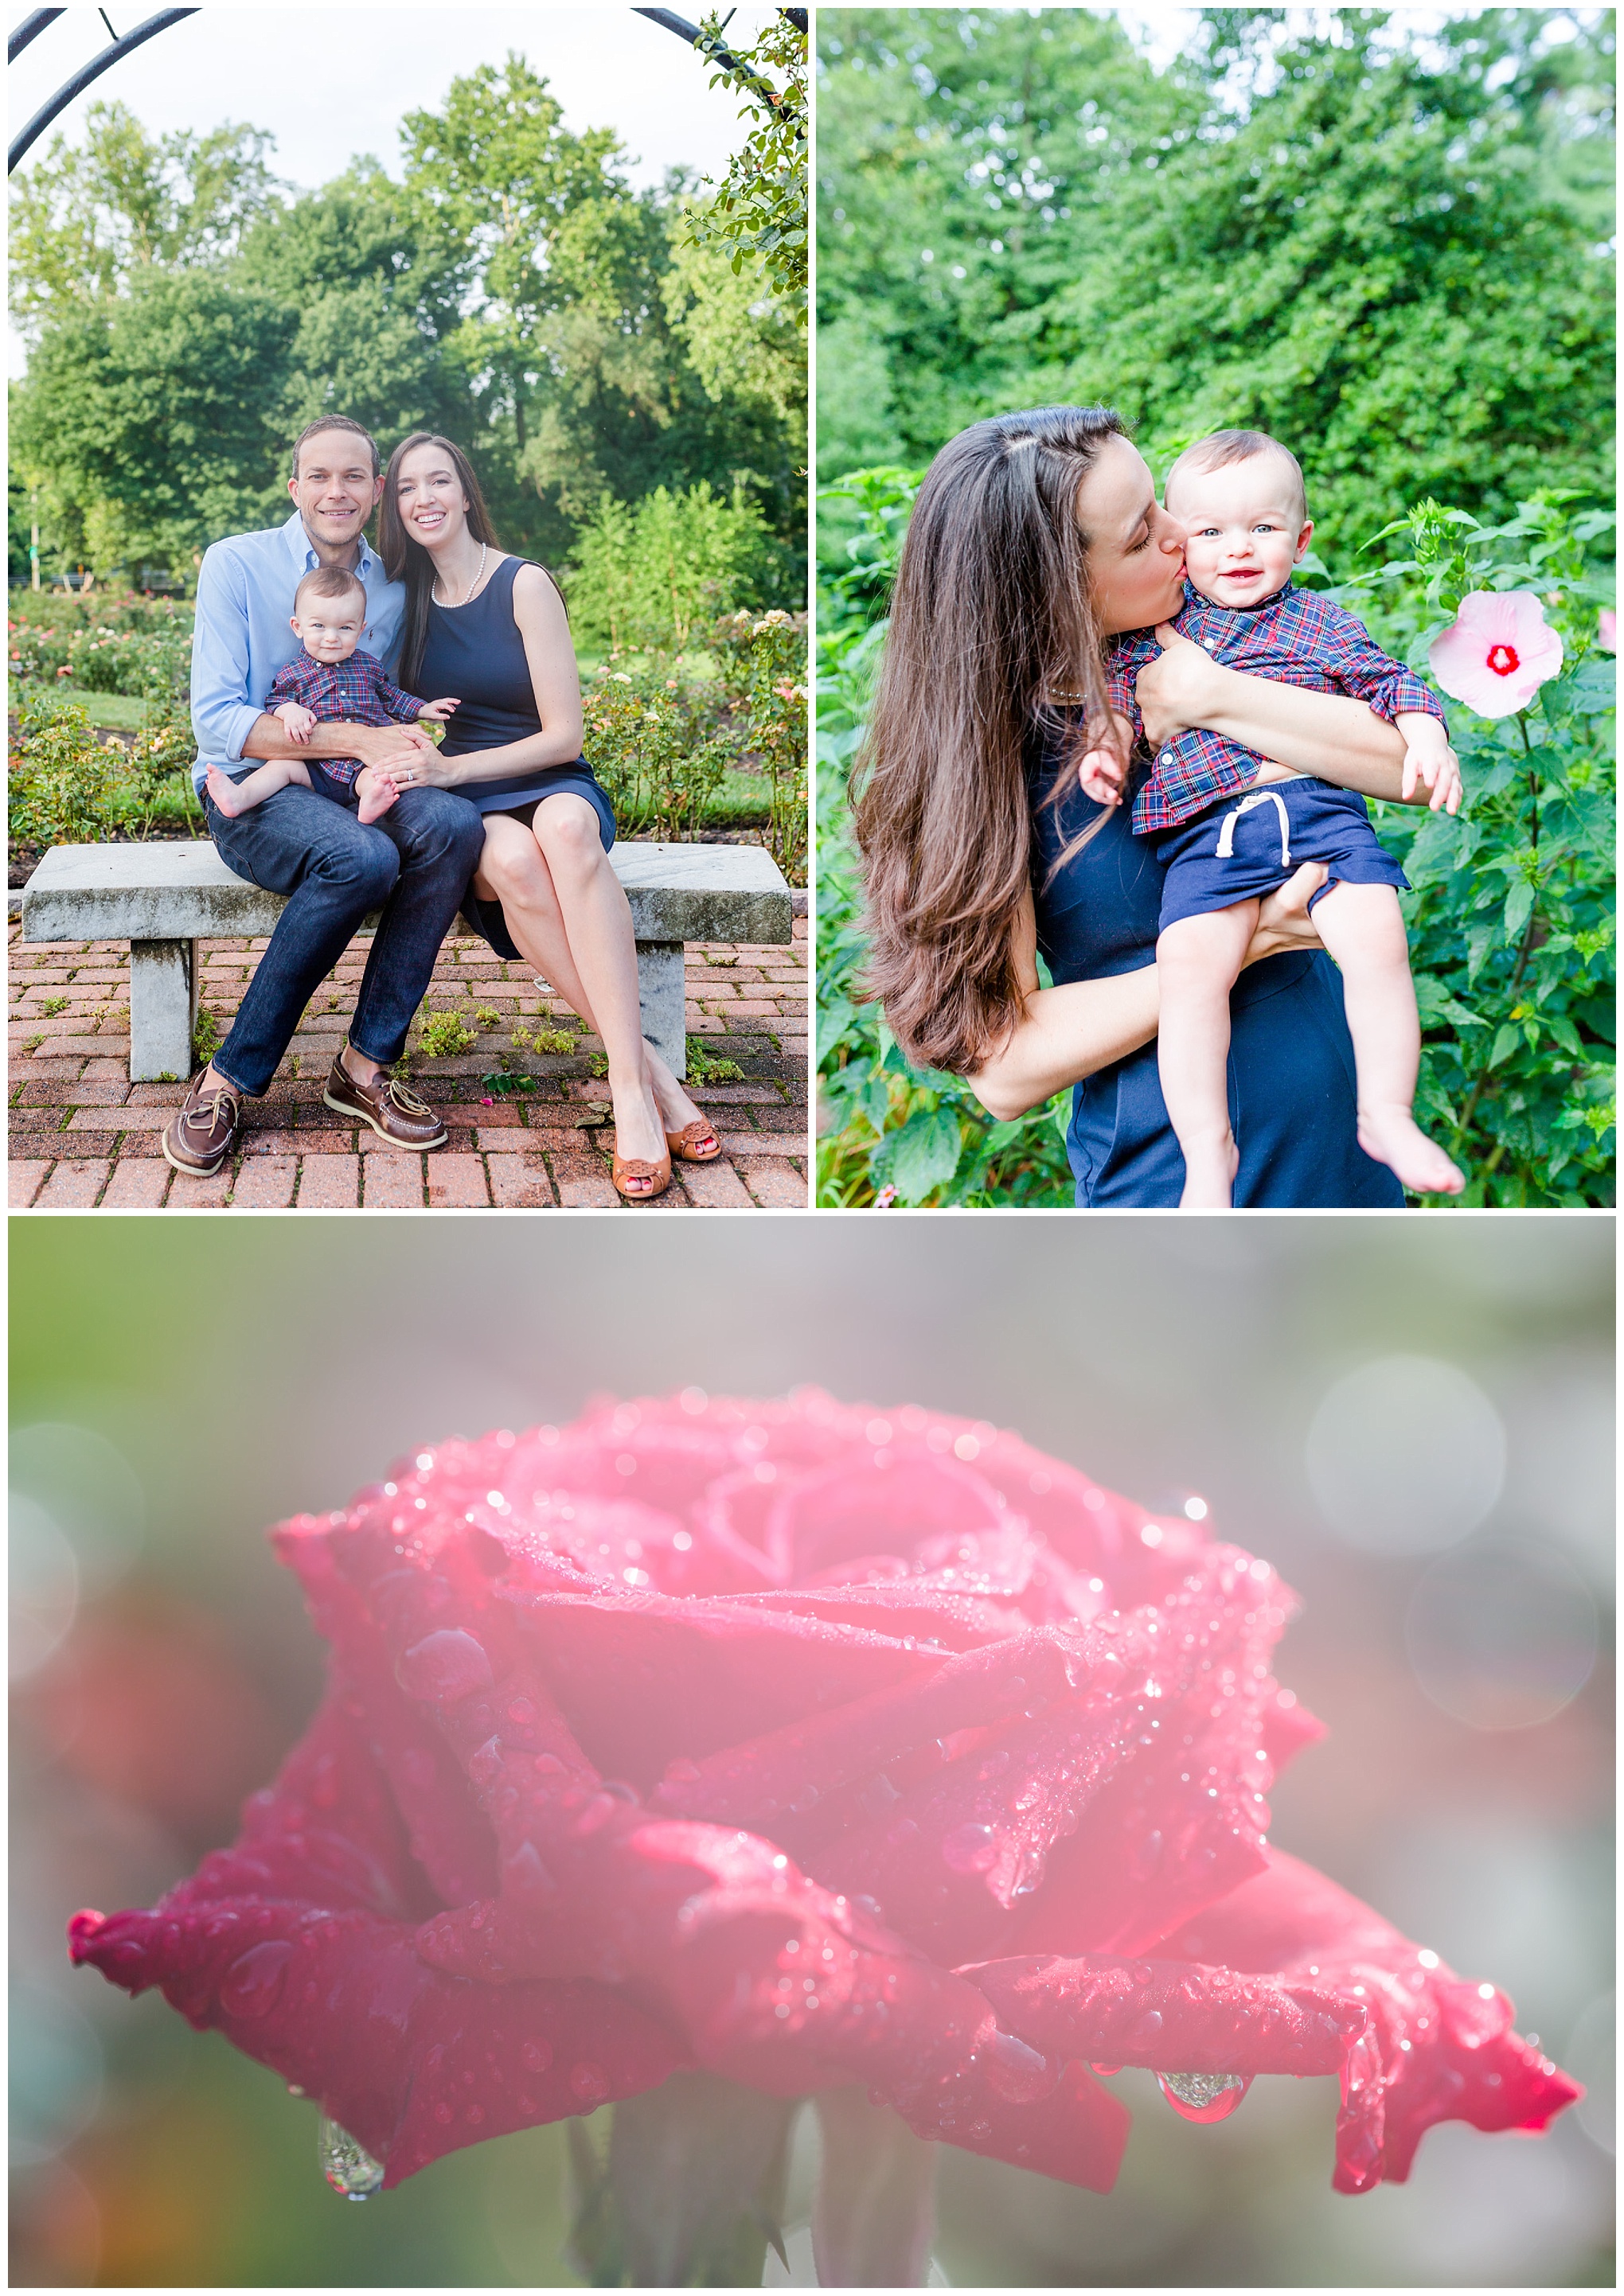 Bon Air Memorial Rose Garden family photos, family of three, garden photos, archway , family portraits, seated portraits, laughing baby, roses, pink roses, dewy roses, morning dew